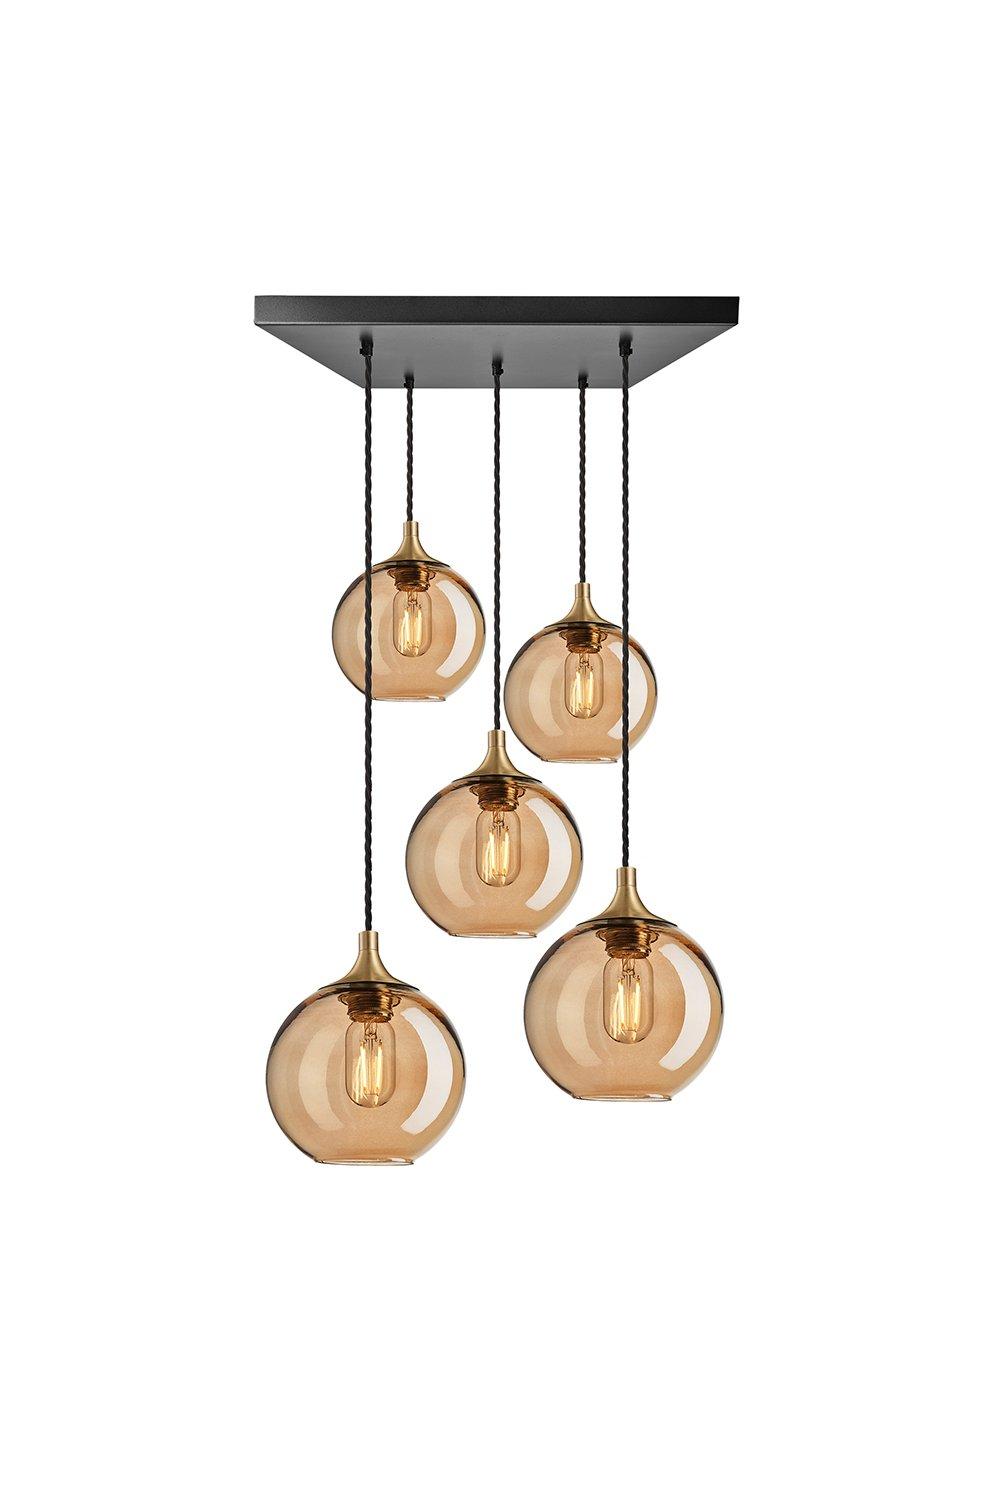 Chelsea Tinted Glass Globe 5 Wire Square Cluster Lights, 7 inch, Amber, Brass holder